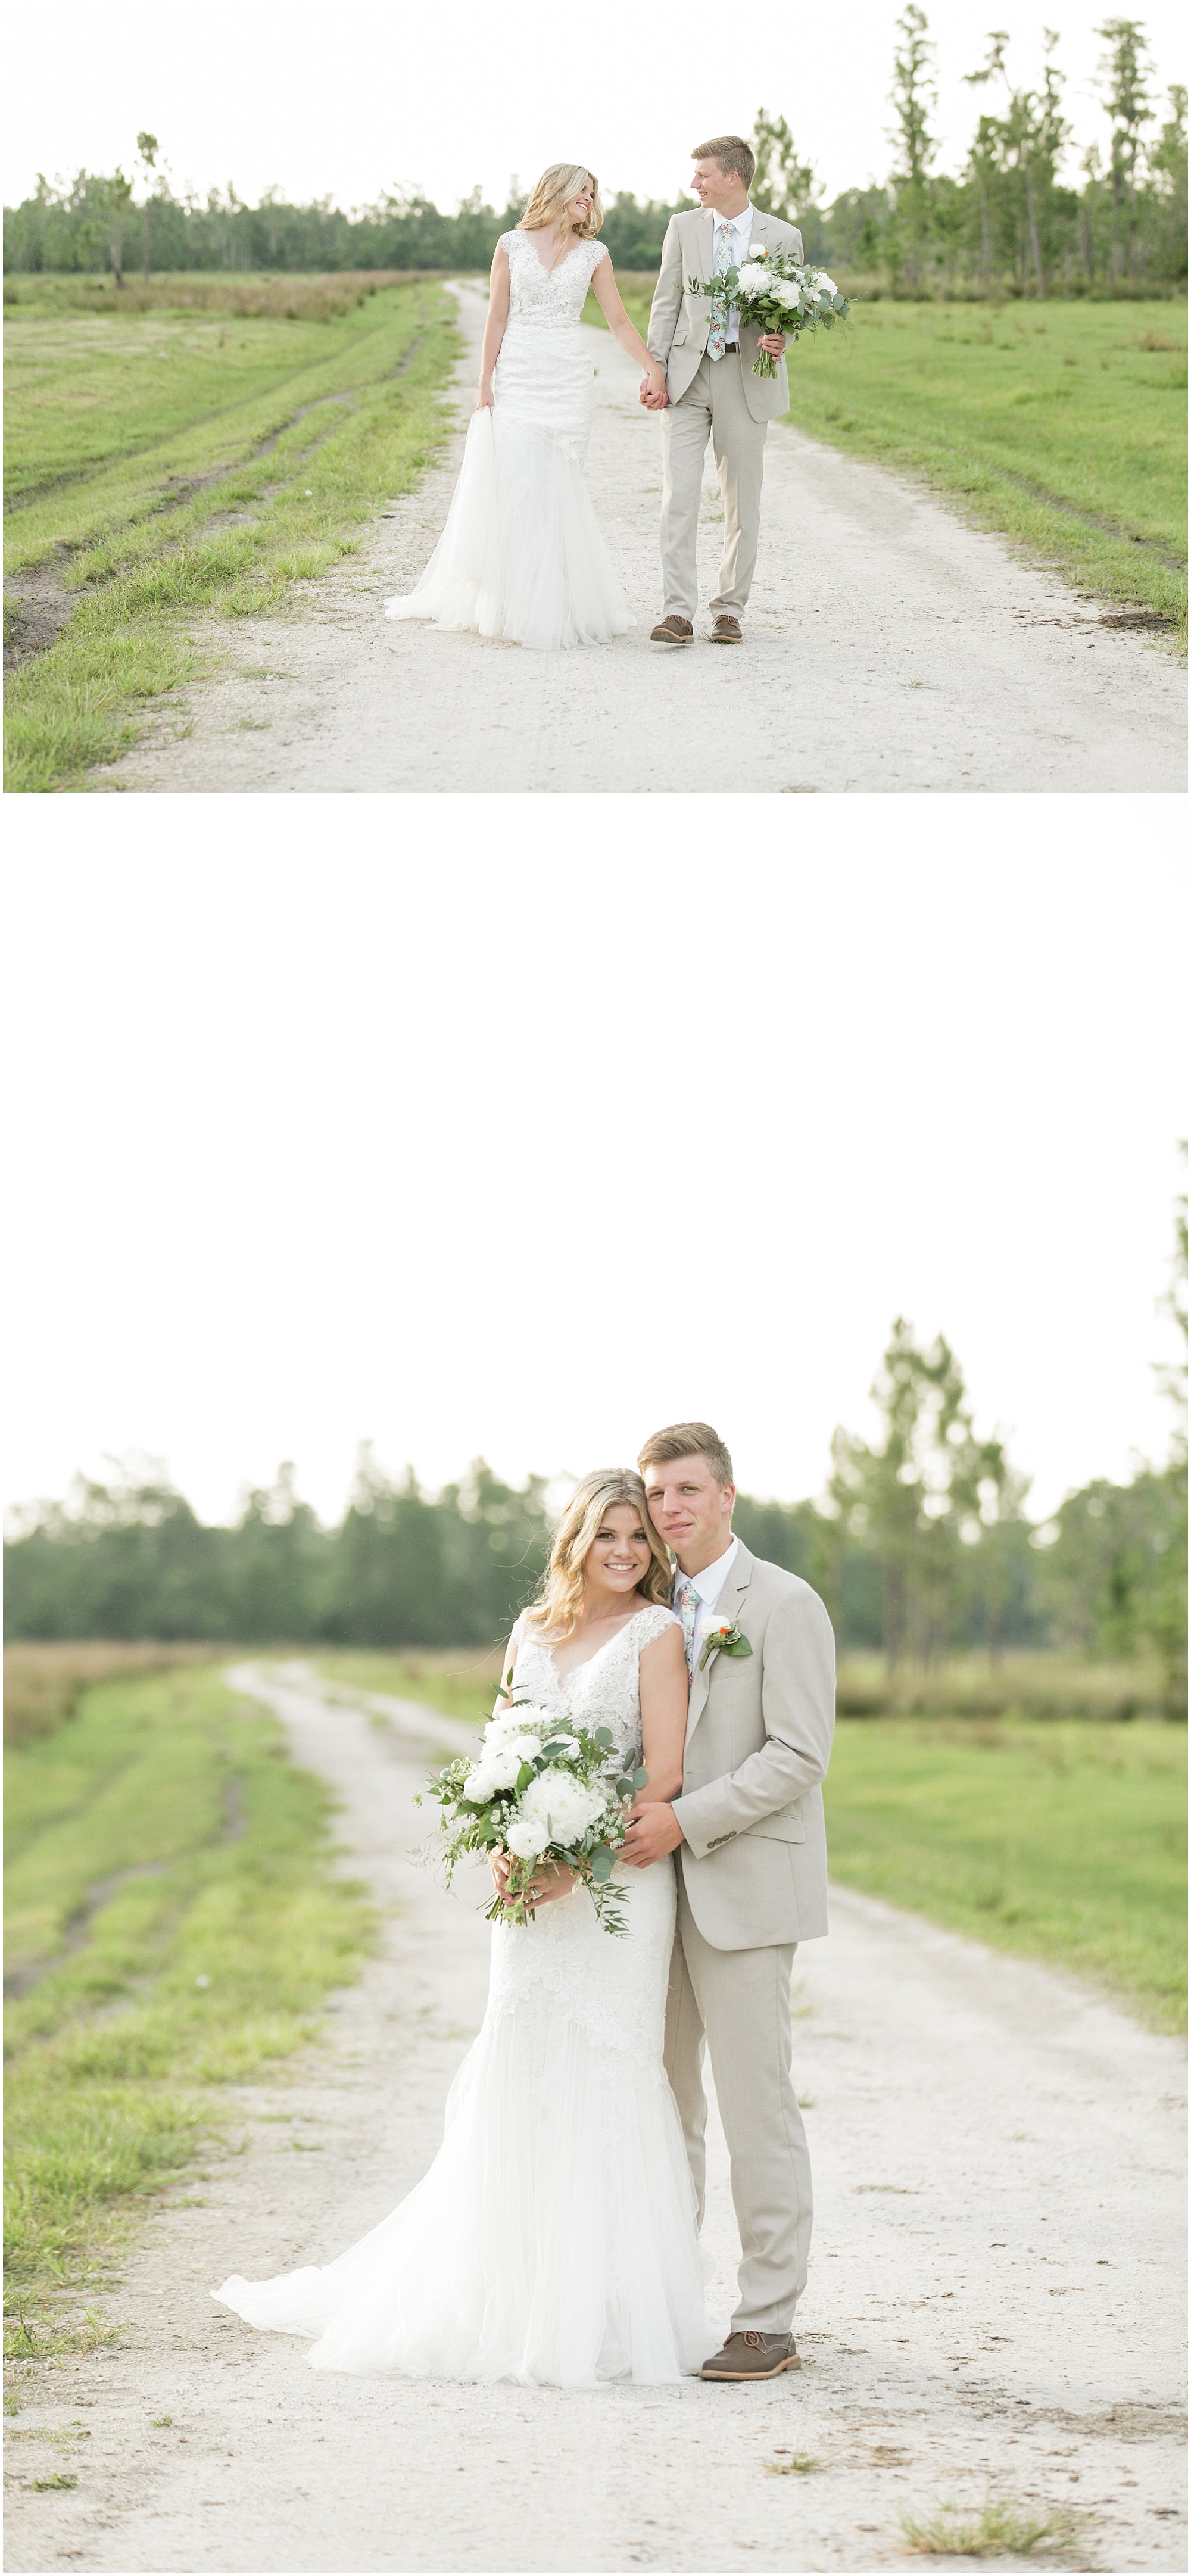 Newly wedded couple taking photos on a dirt road. 